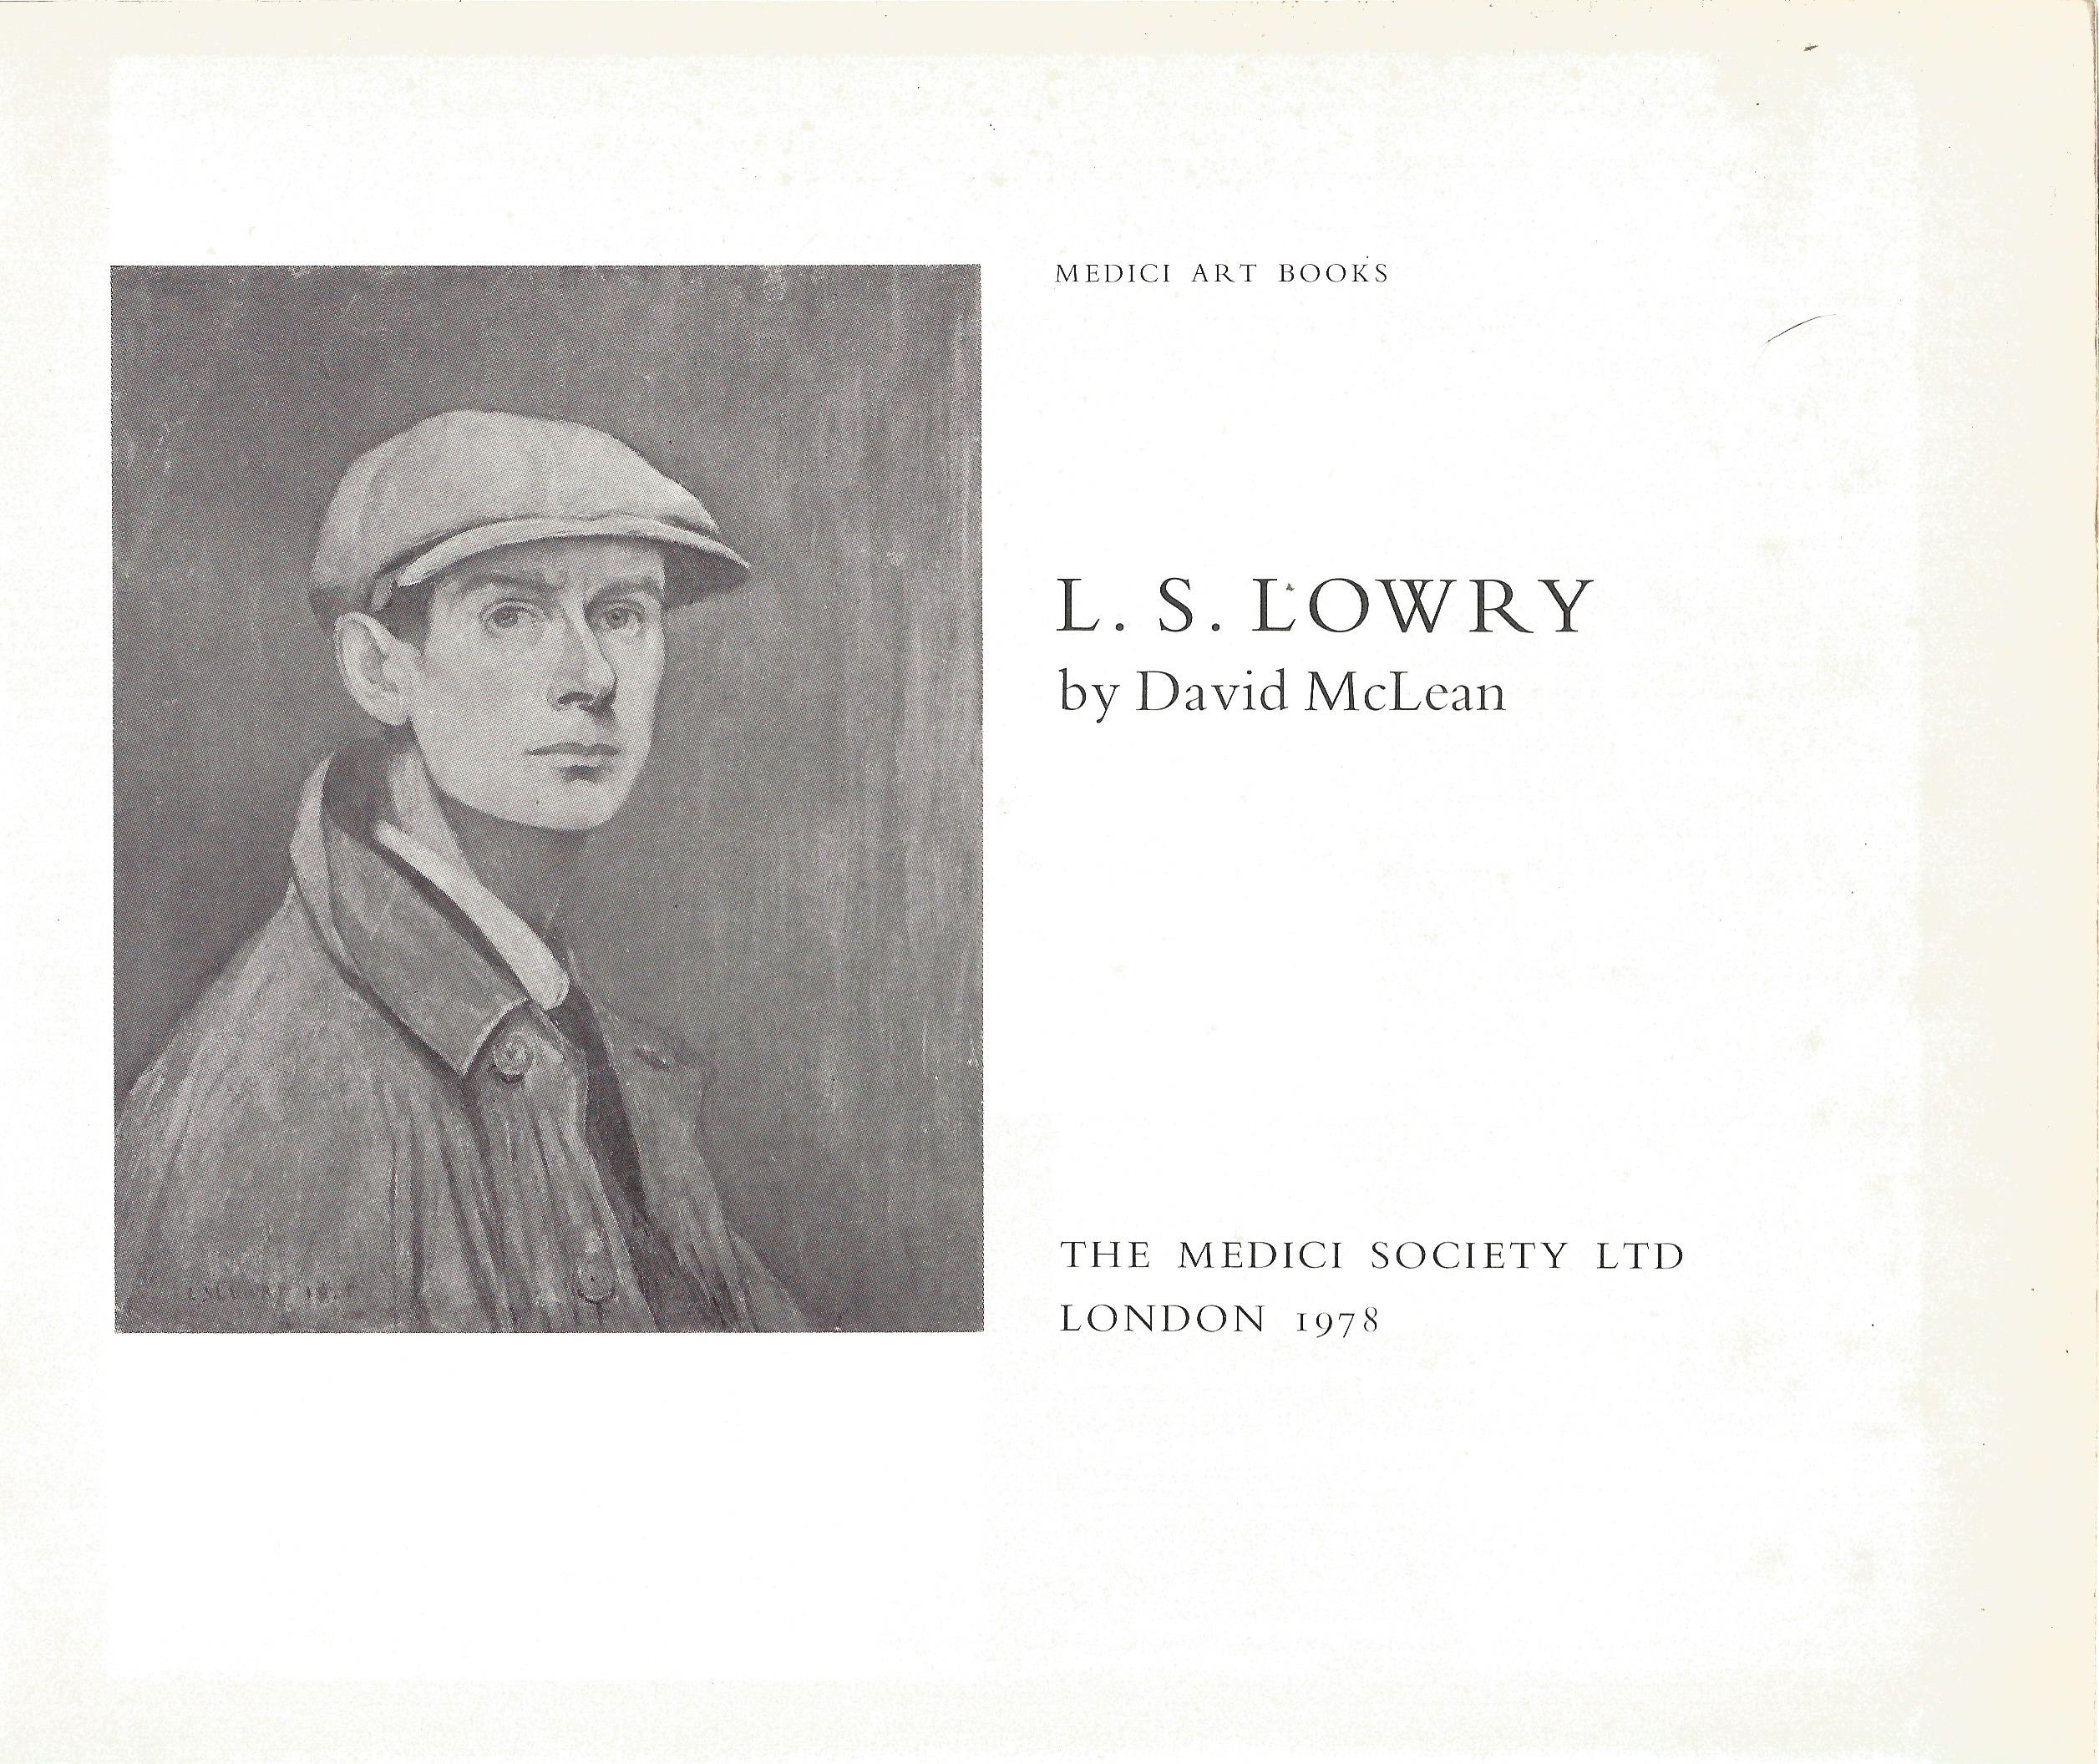 L S Lowry by David McLean Softback Book 1978 published by The Medici Society Ltd some ageing good - Image 3 of 3